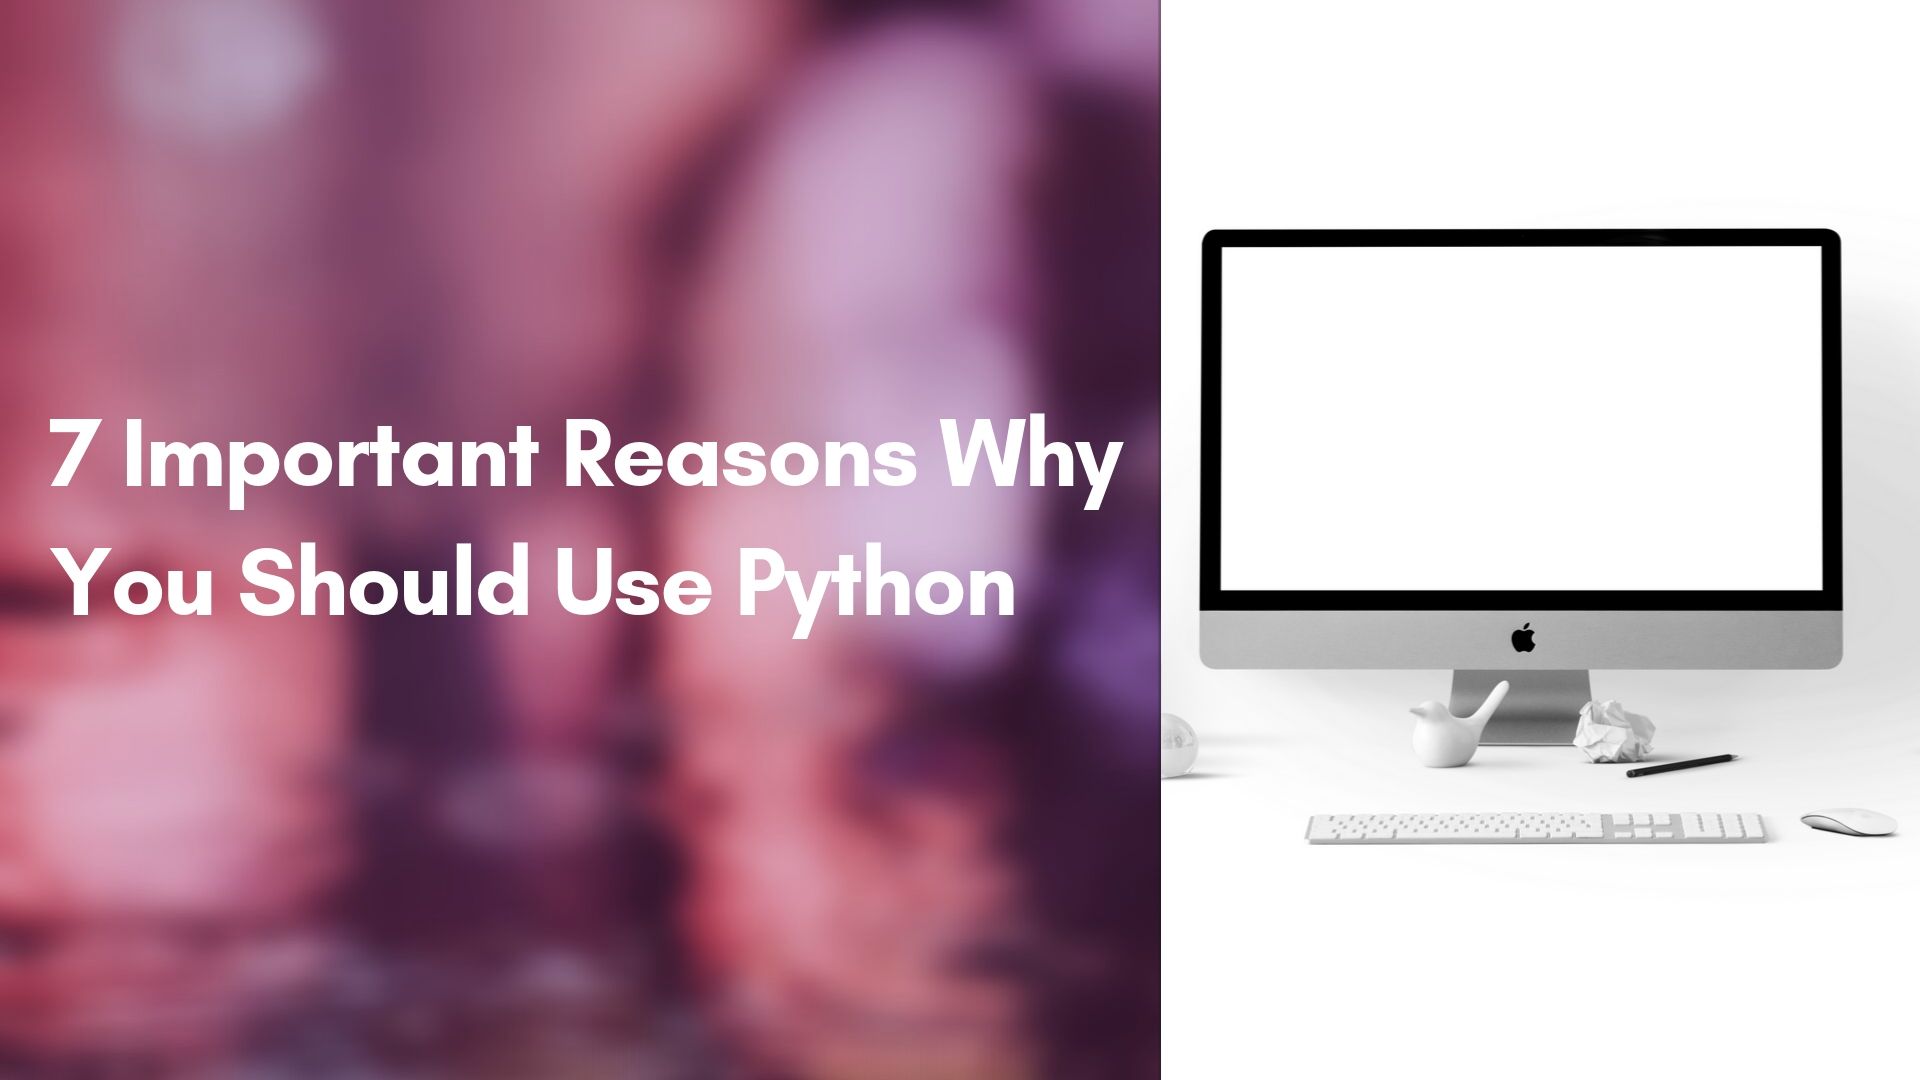 7 Important Reasons Why You Should Use Python